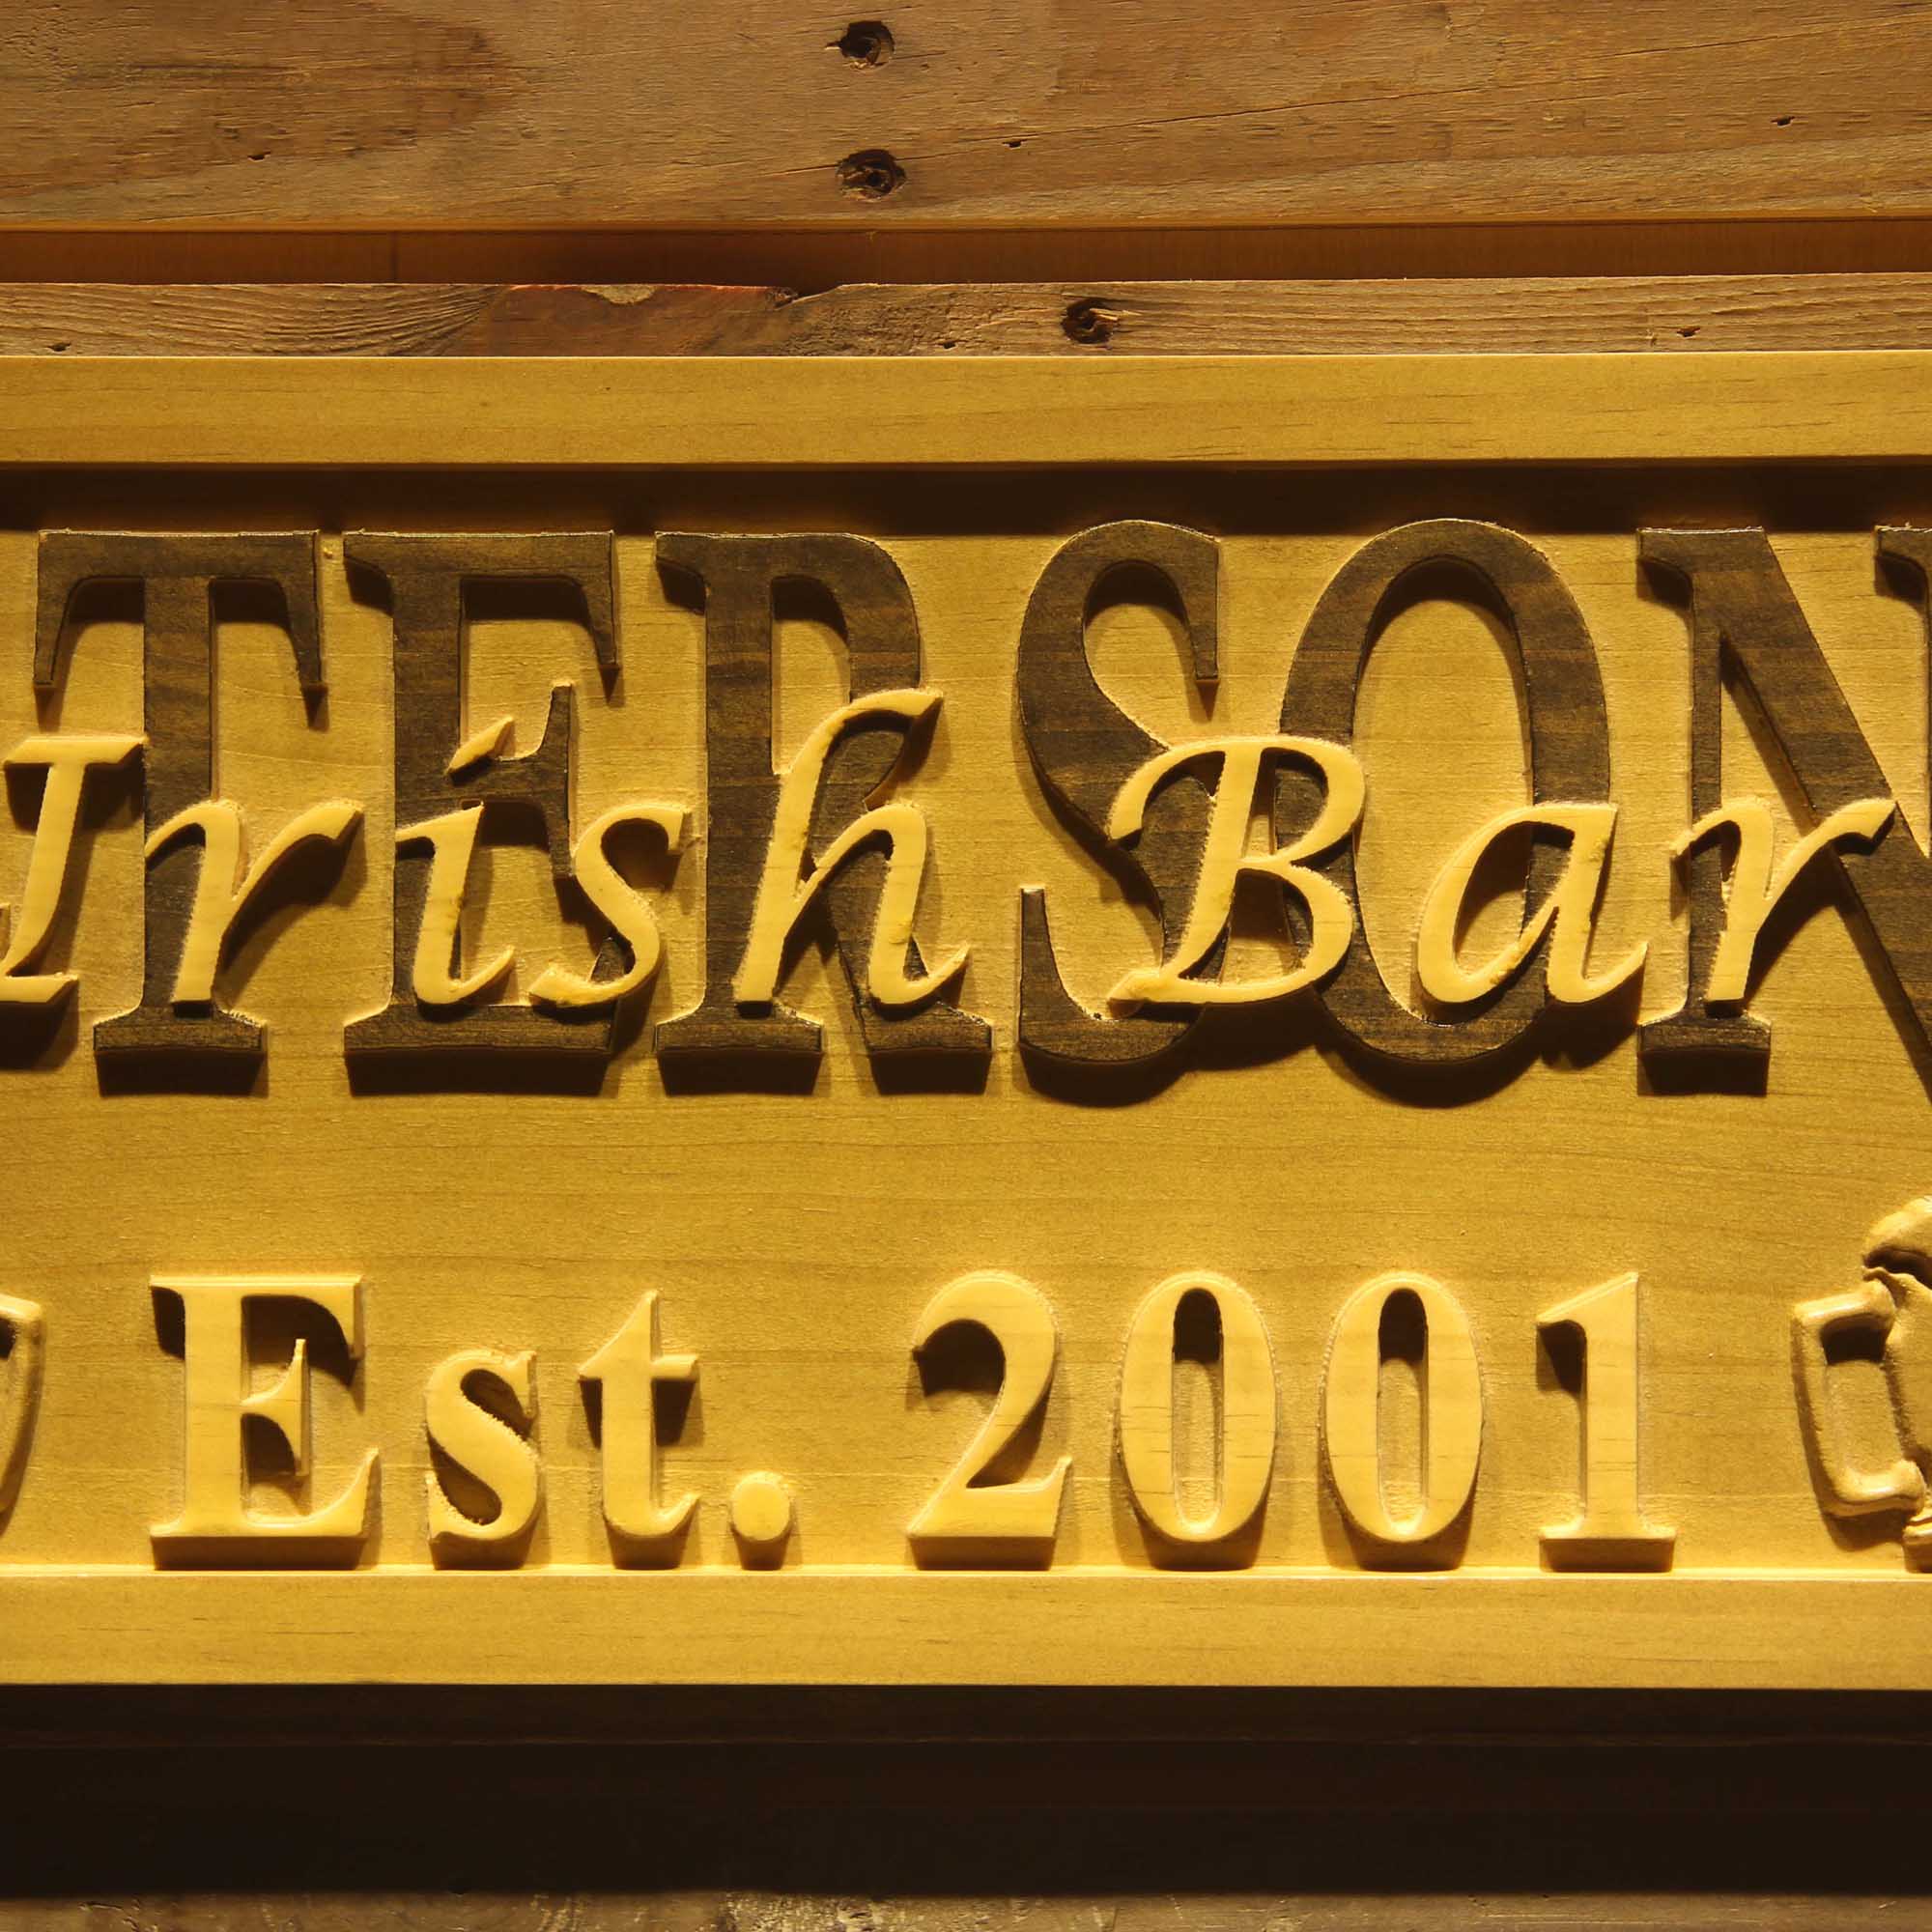 Personalized Irish Bar Wooden Sign Beer Mugs Rustic Home Décor Lake House Décor Man Cave Game Room Plaques Wood Signs